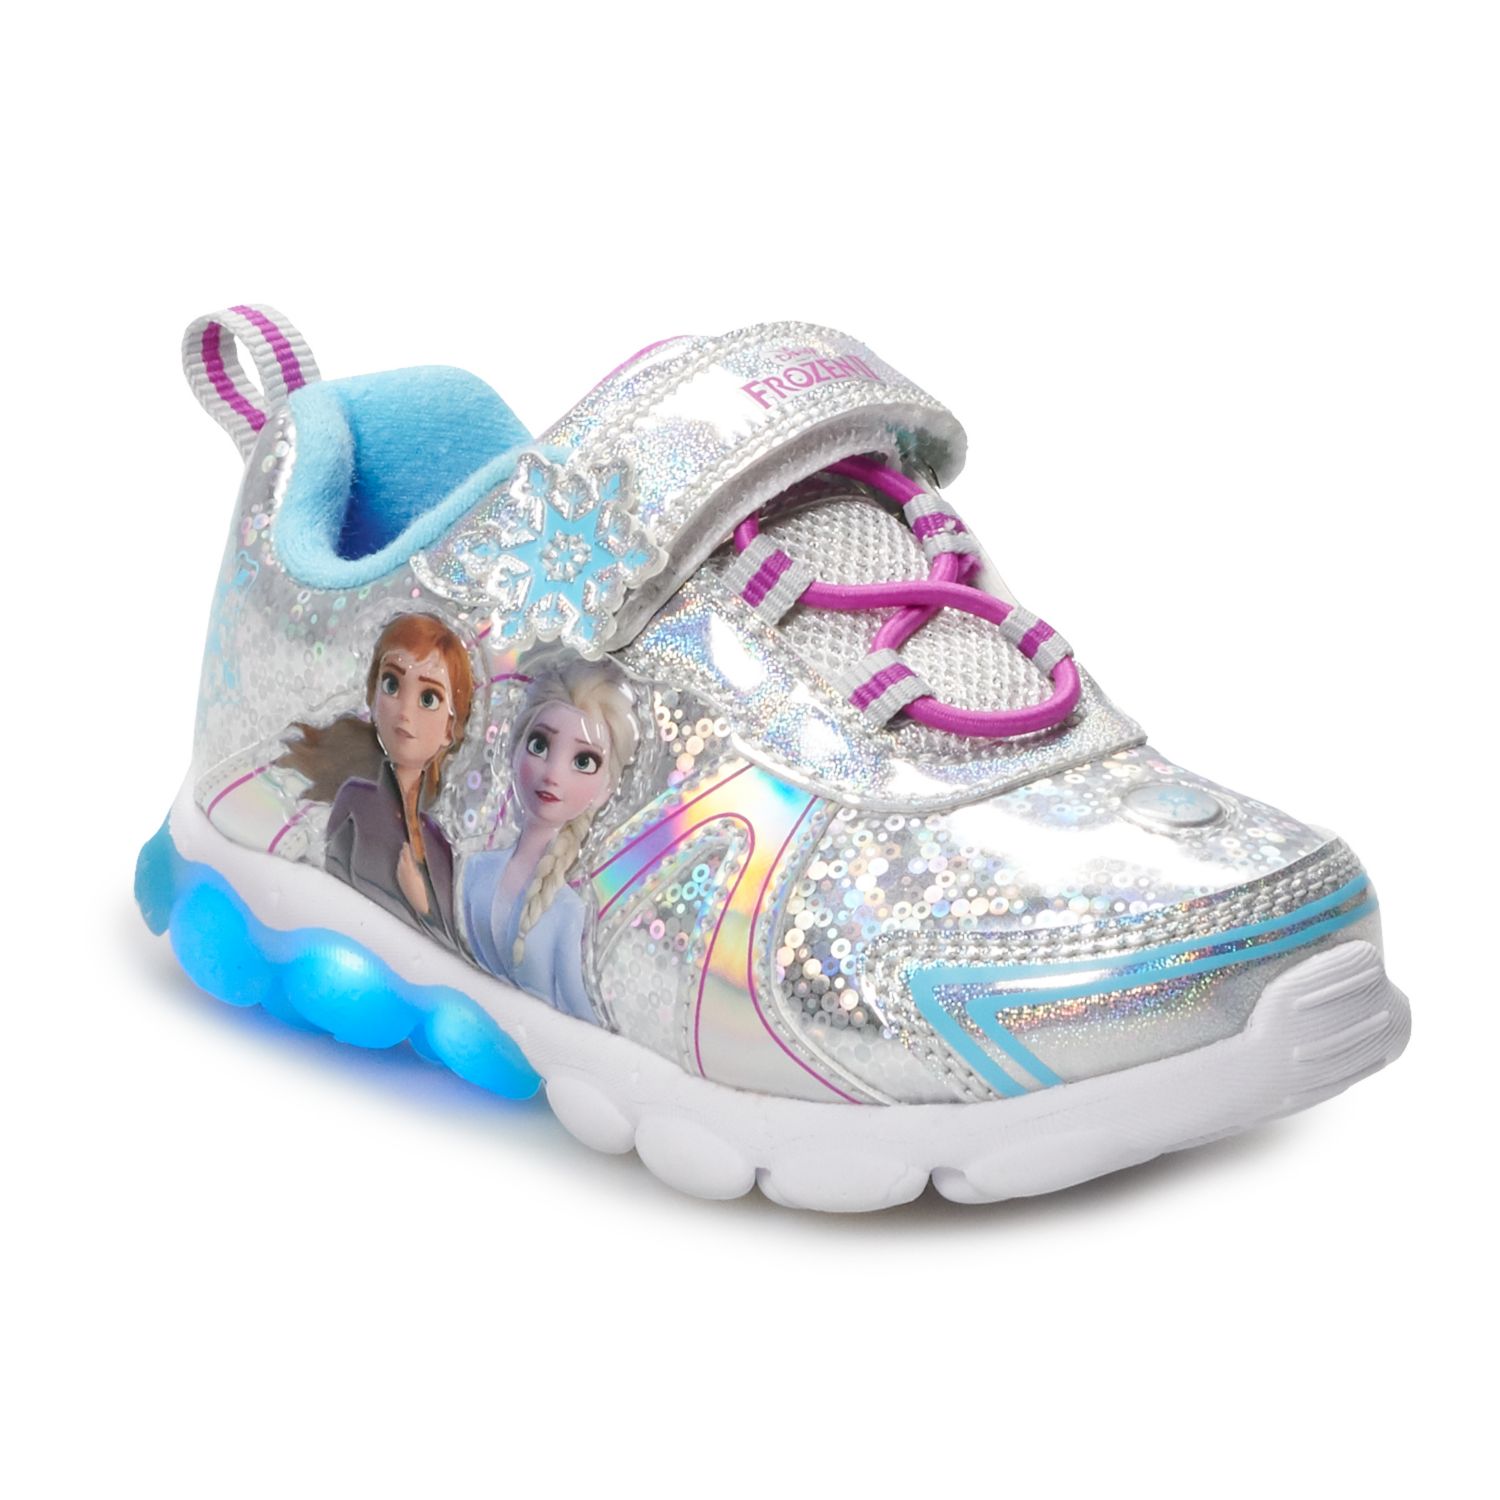 where can i buy light up sneakers